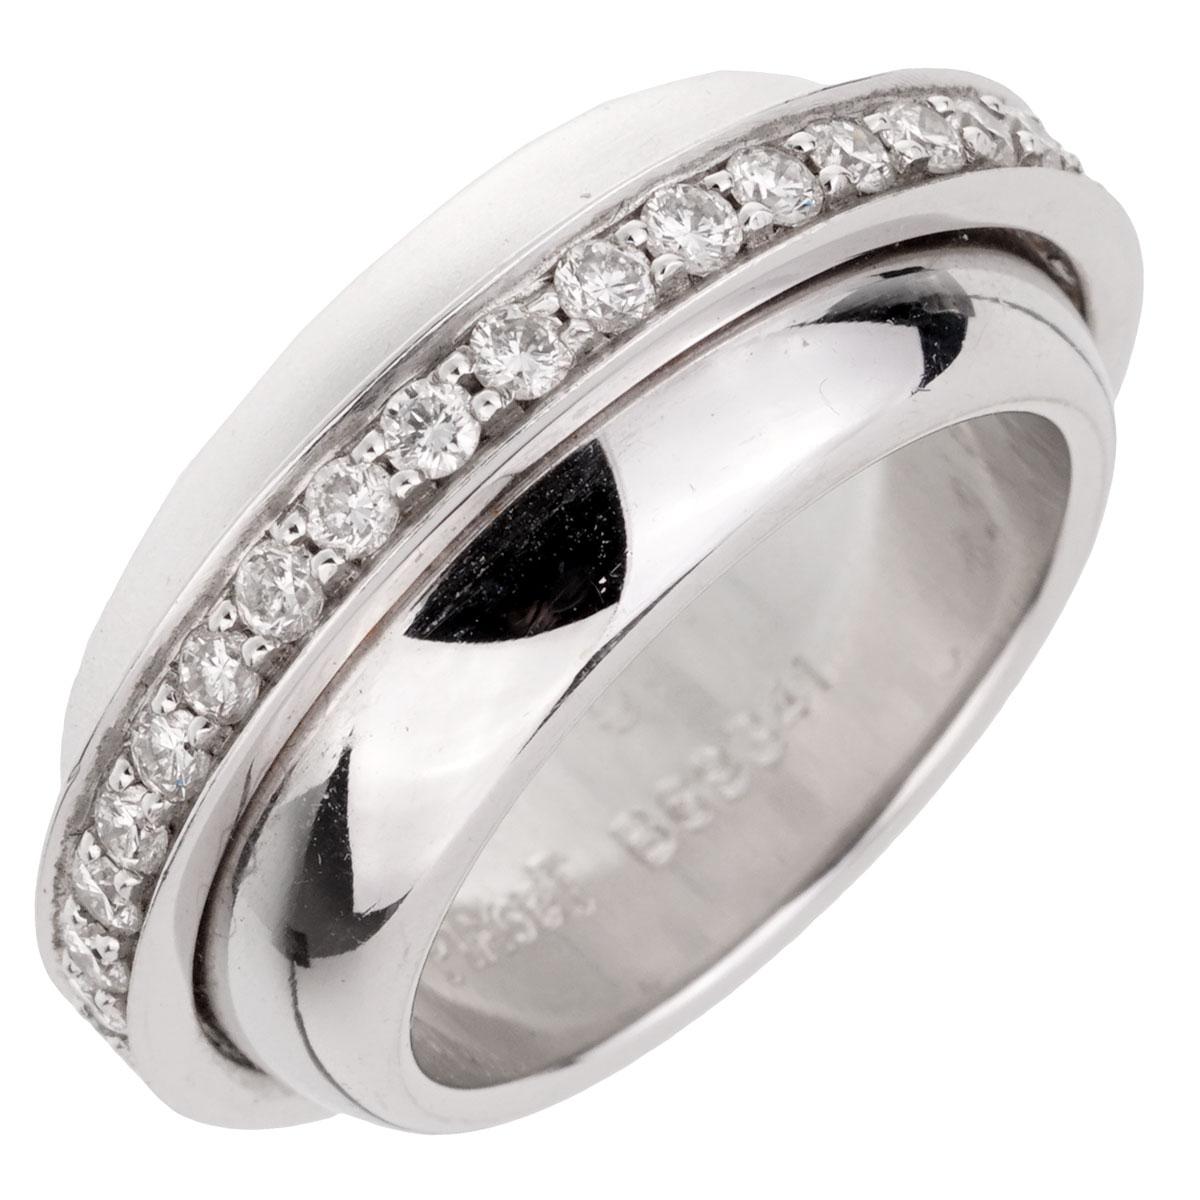 A fabulous Piaget Possession diamond ring adorned with 22 of the finest round brilliant cut diamonds set on the upper layer in 18k white gold. The ring measures a size 5 1/2

Sku: 1925